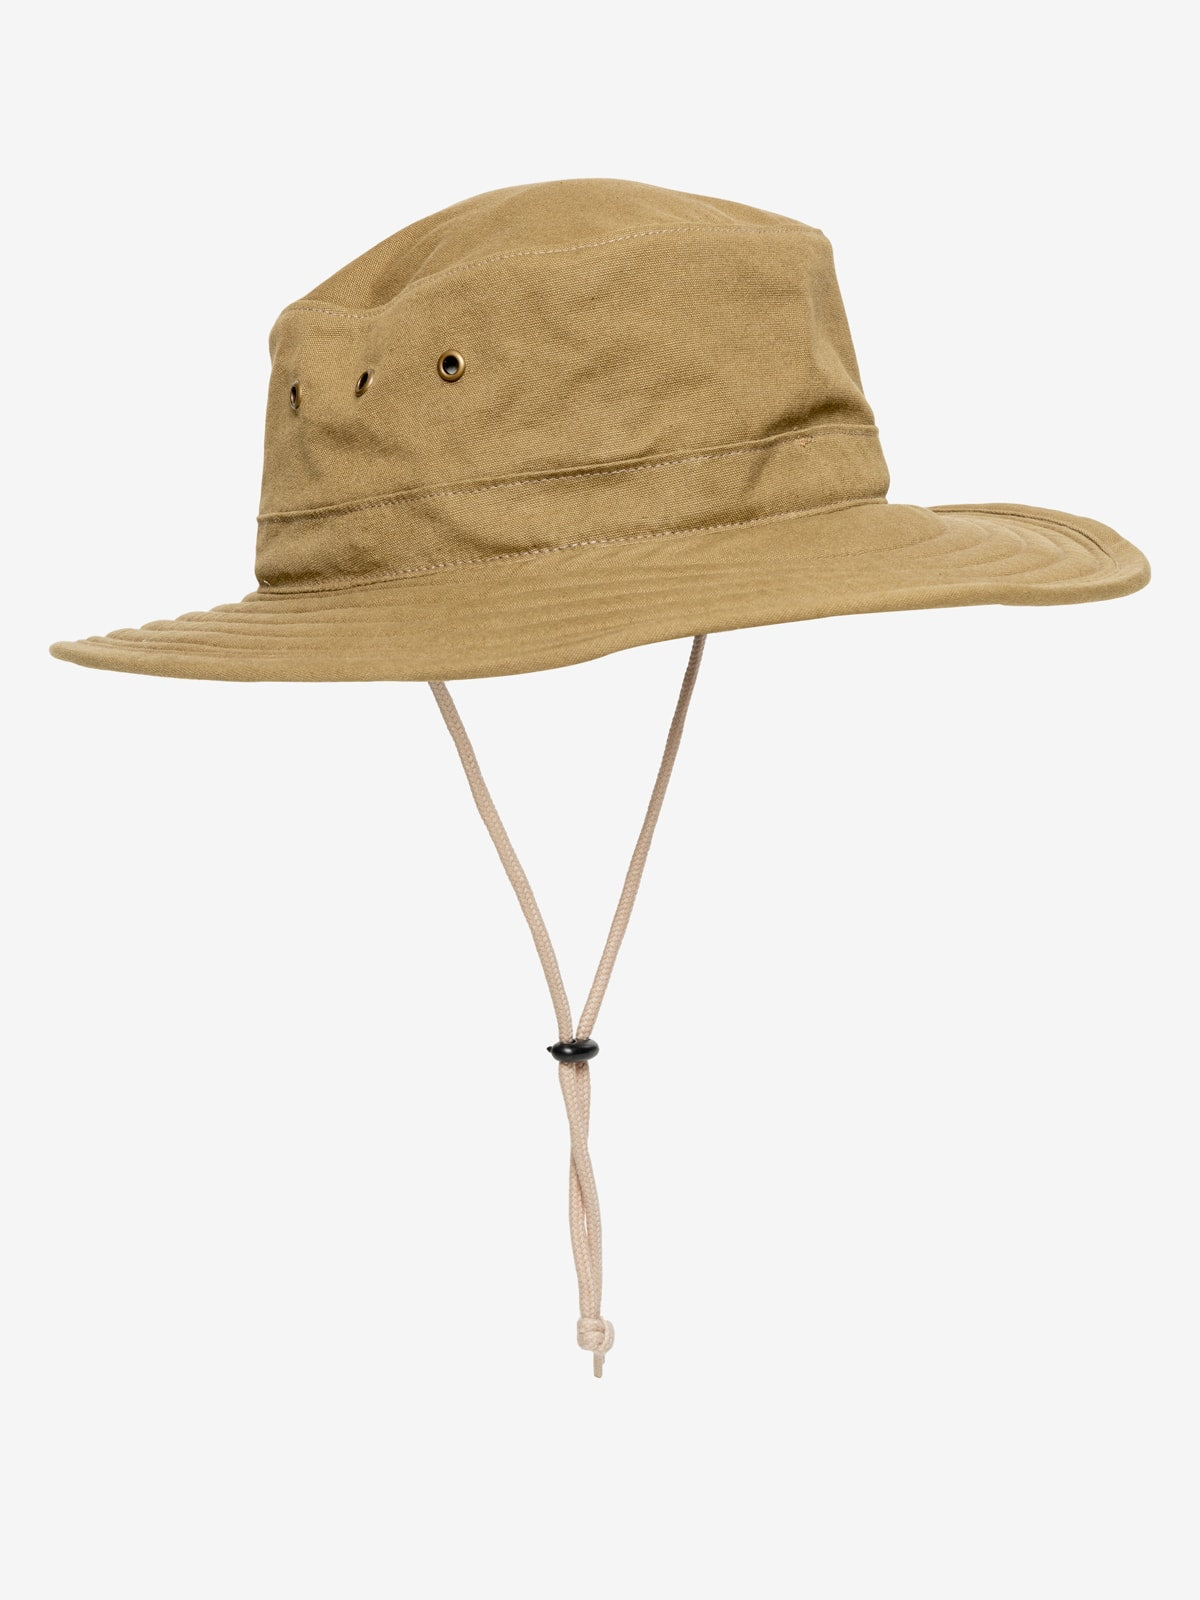 Insect Repellent Brim Hat  Our Best-Selling Repellent Hat